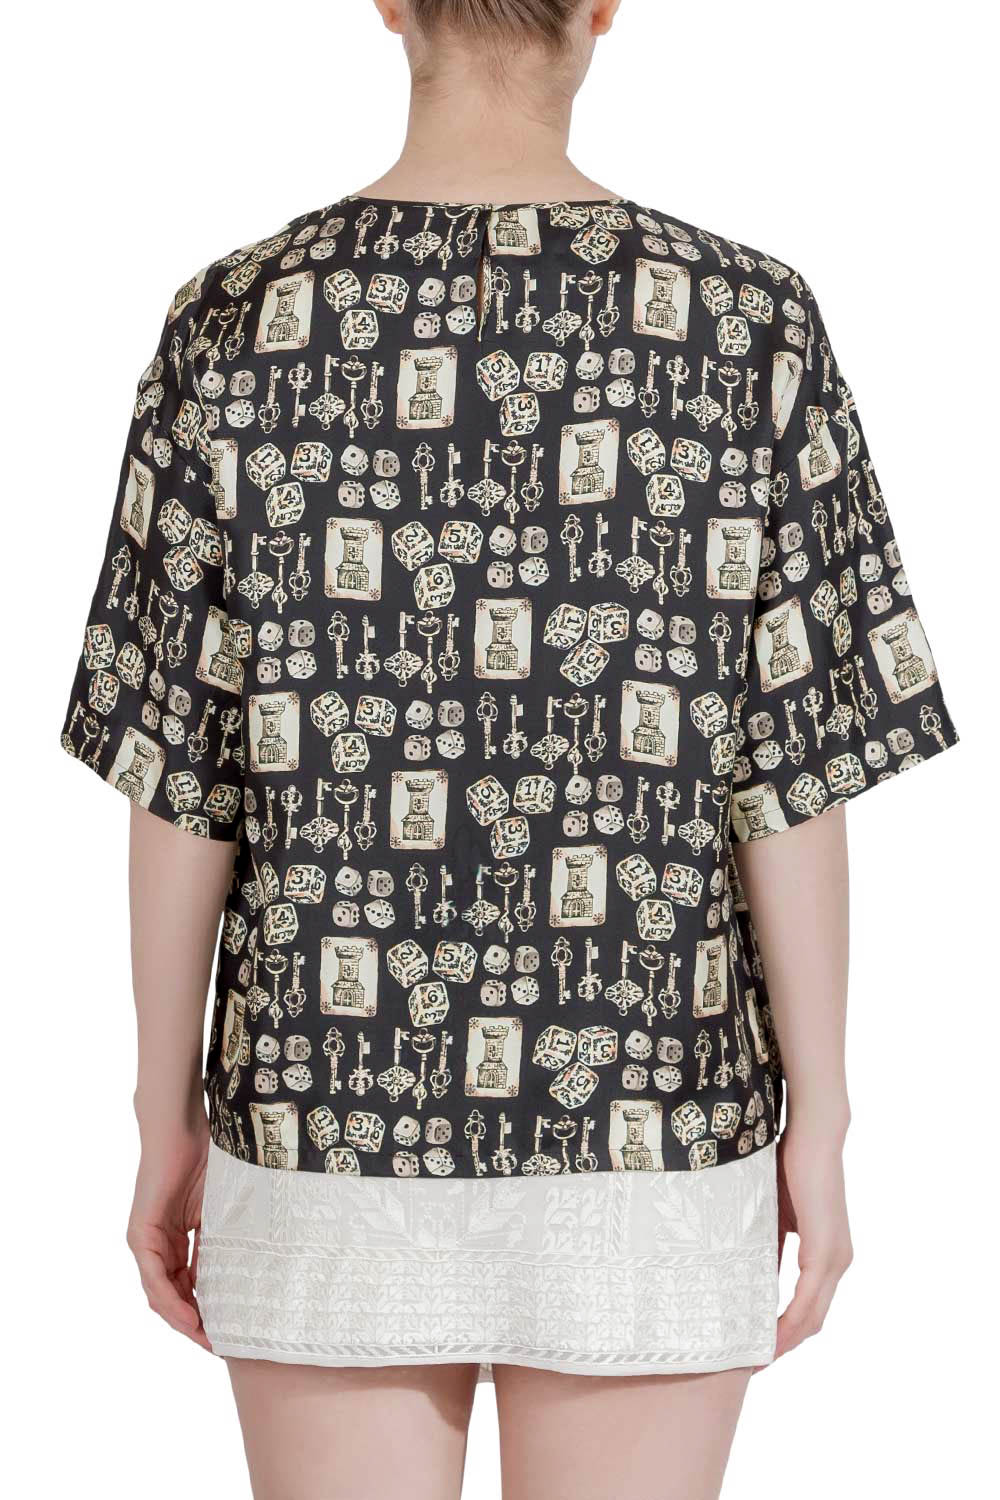 Pre-owned Dolce & Gabbana Black And Beige Dice Key Printed Silk Short Sleeve Top M